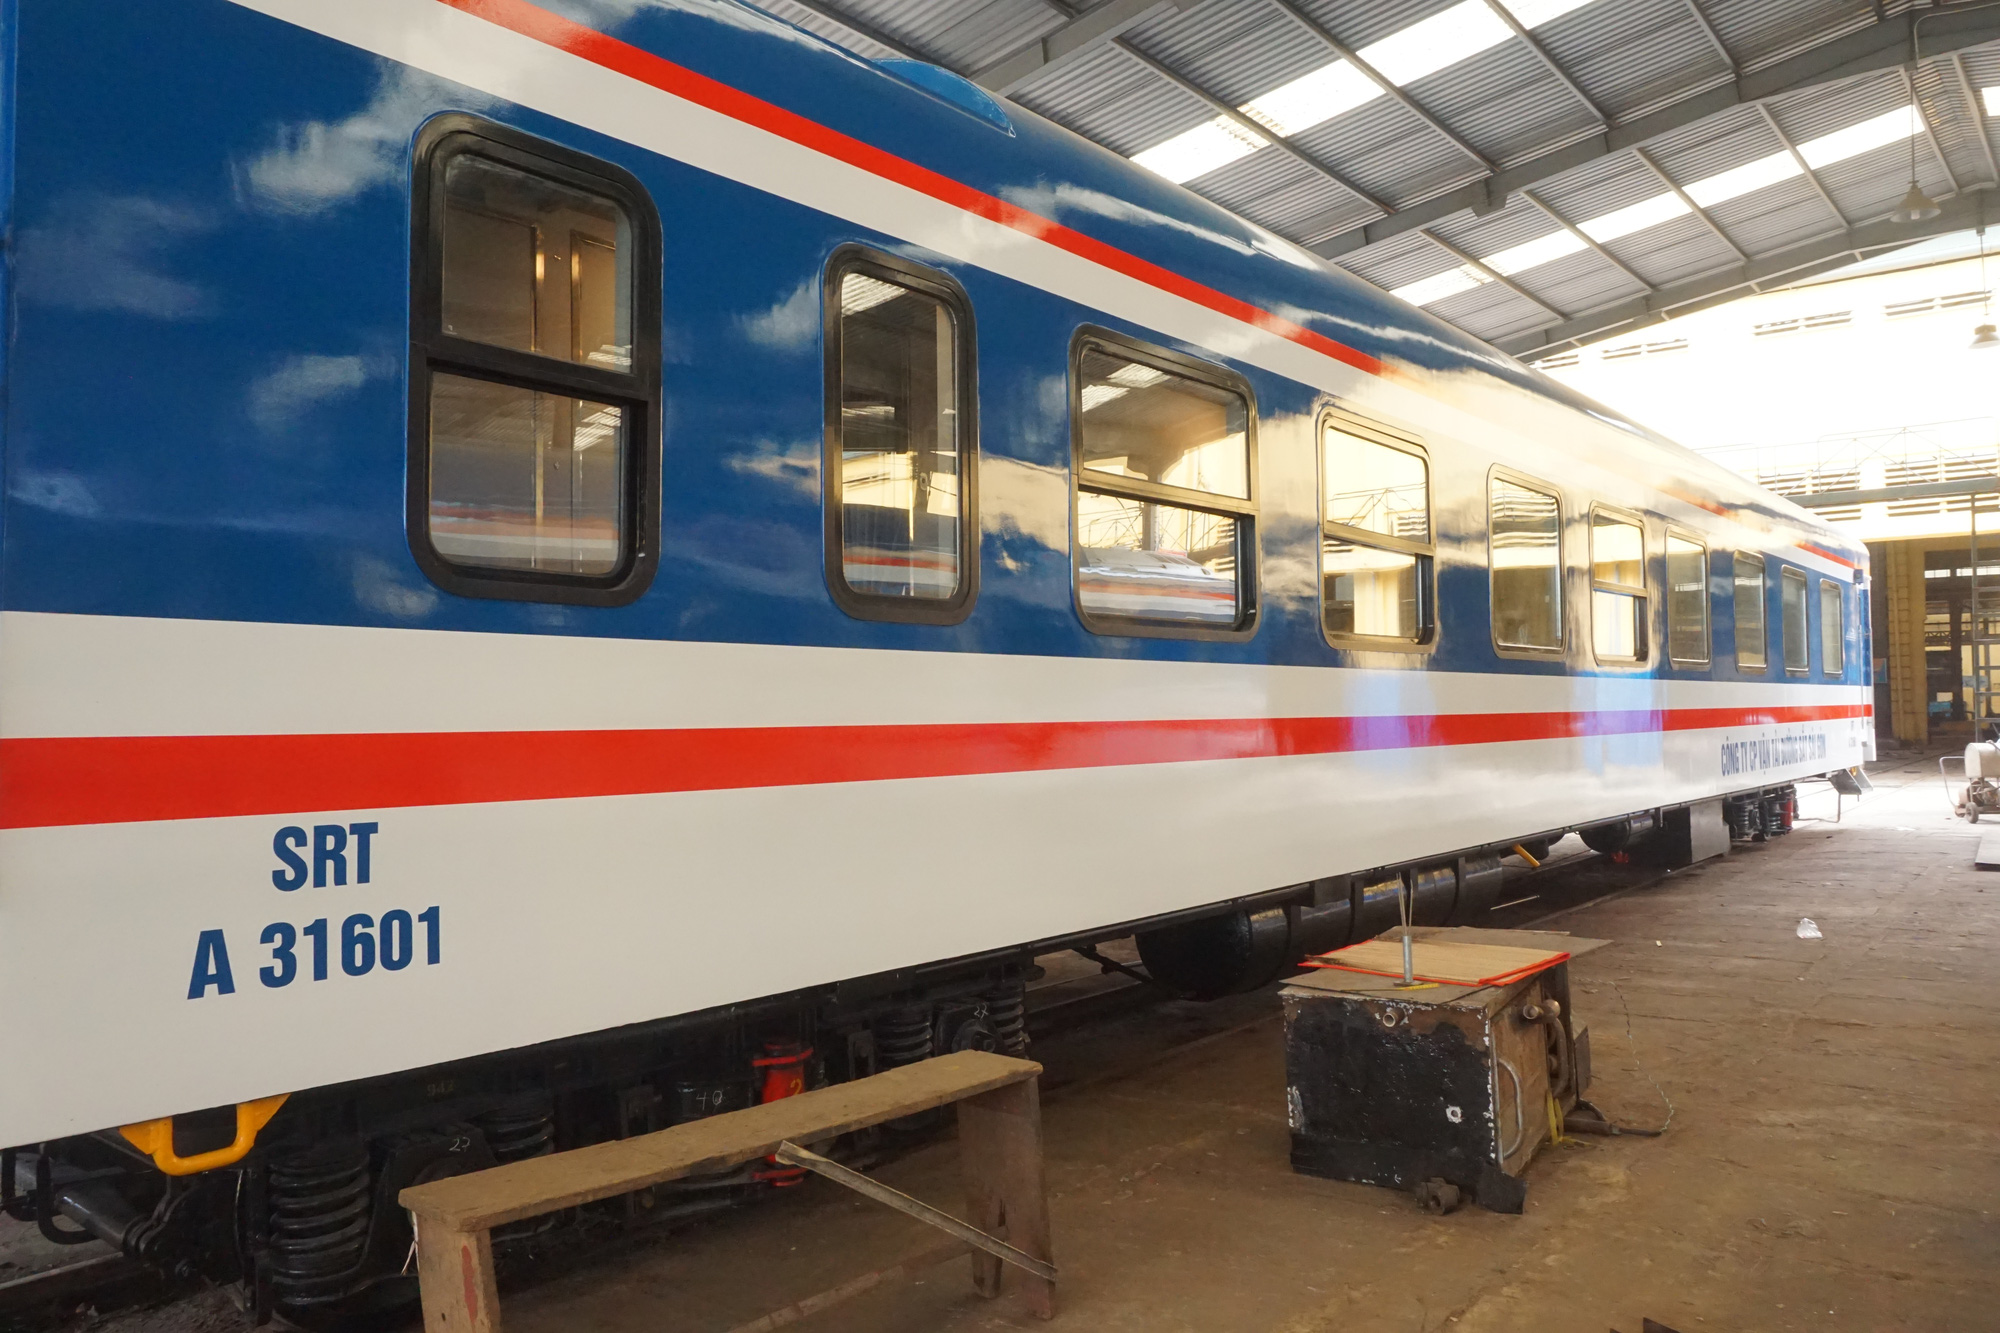 The exterior of a bar carriage of Di An Train JSC. Photo: Duc Phu / Tuoi Tre